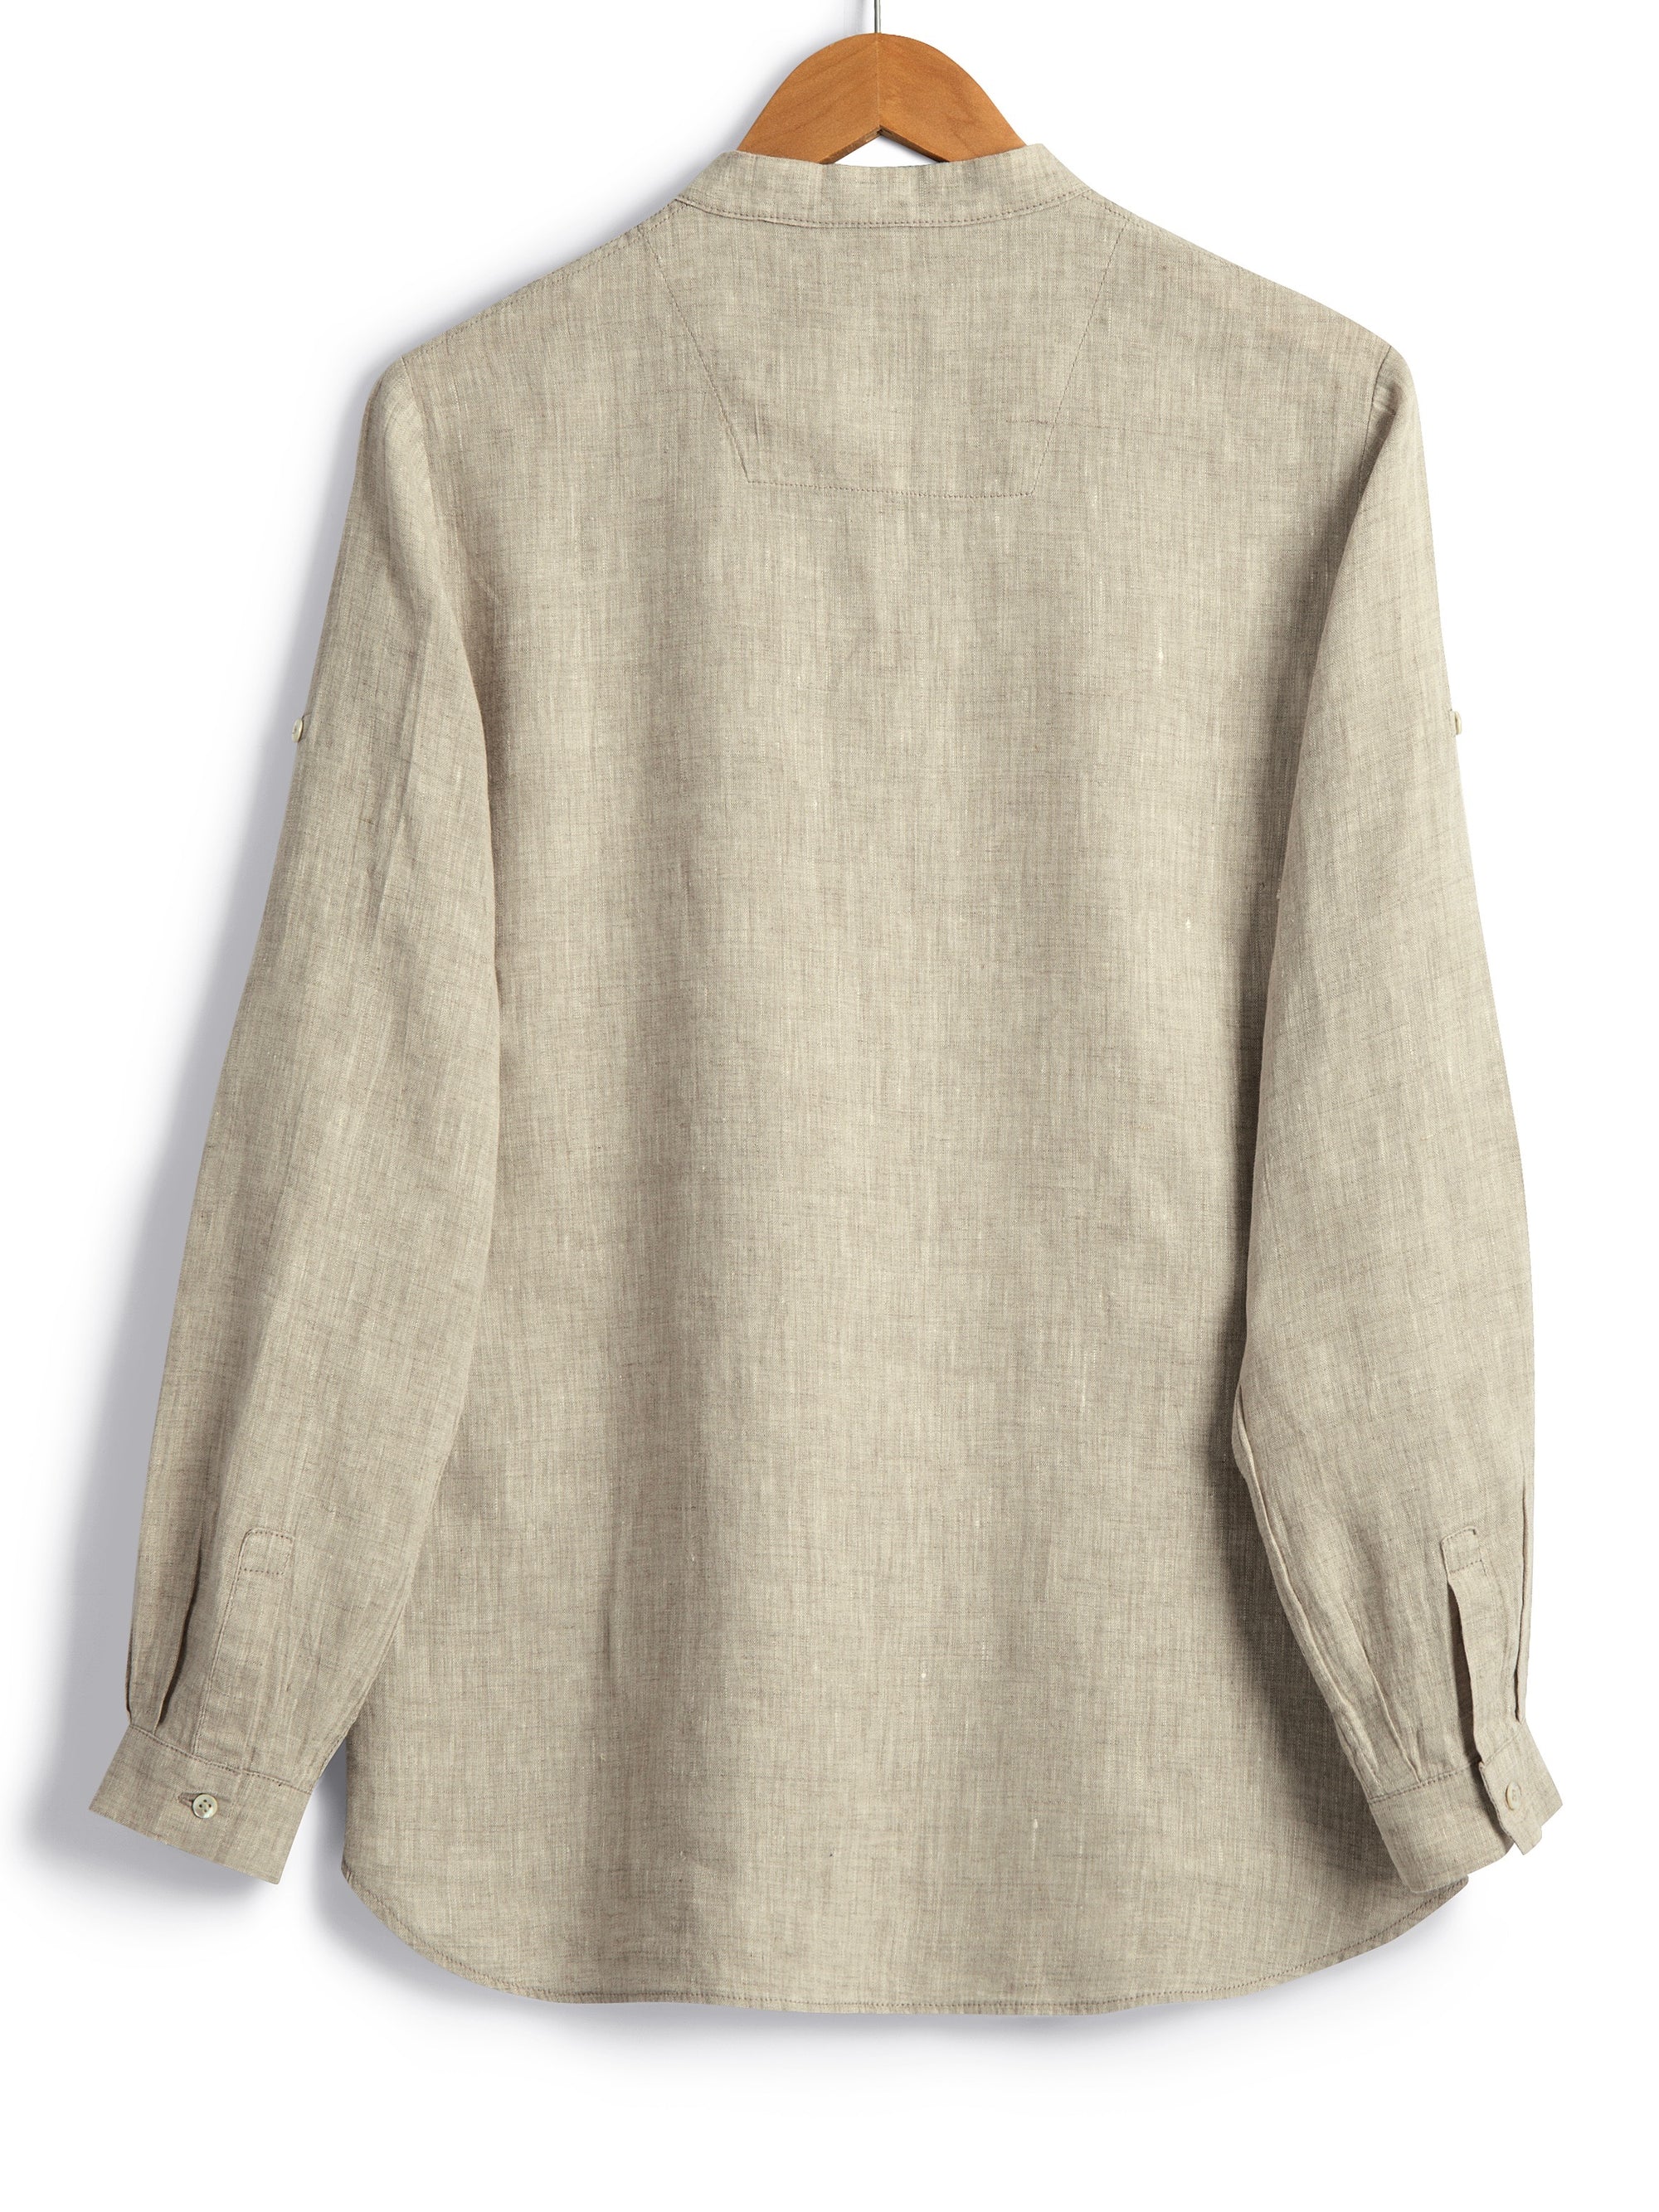 NEW TUNIC IN NATURAL LINEN, Shirt, Hickman & Bousfield - Hickman & Bousfield, Safari and Travel Clothing